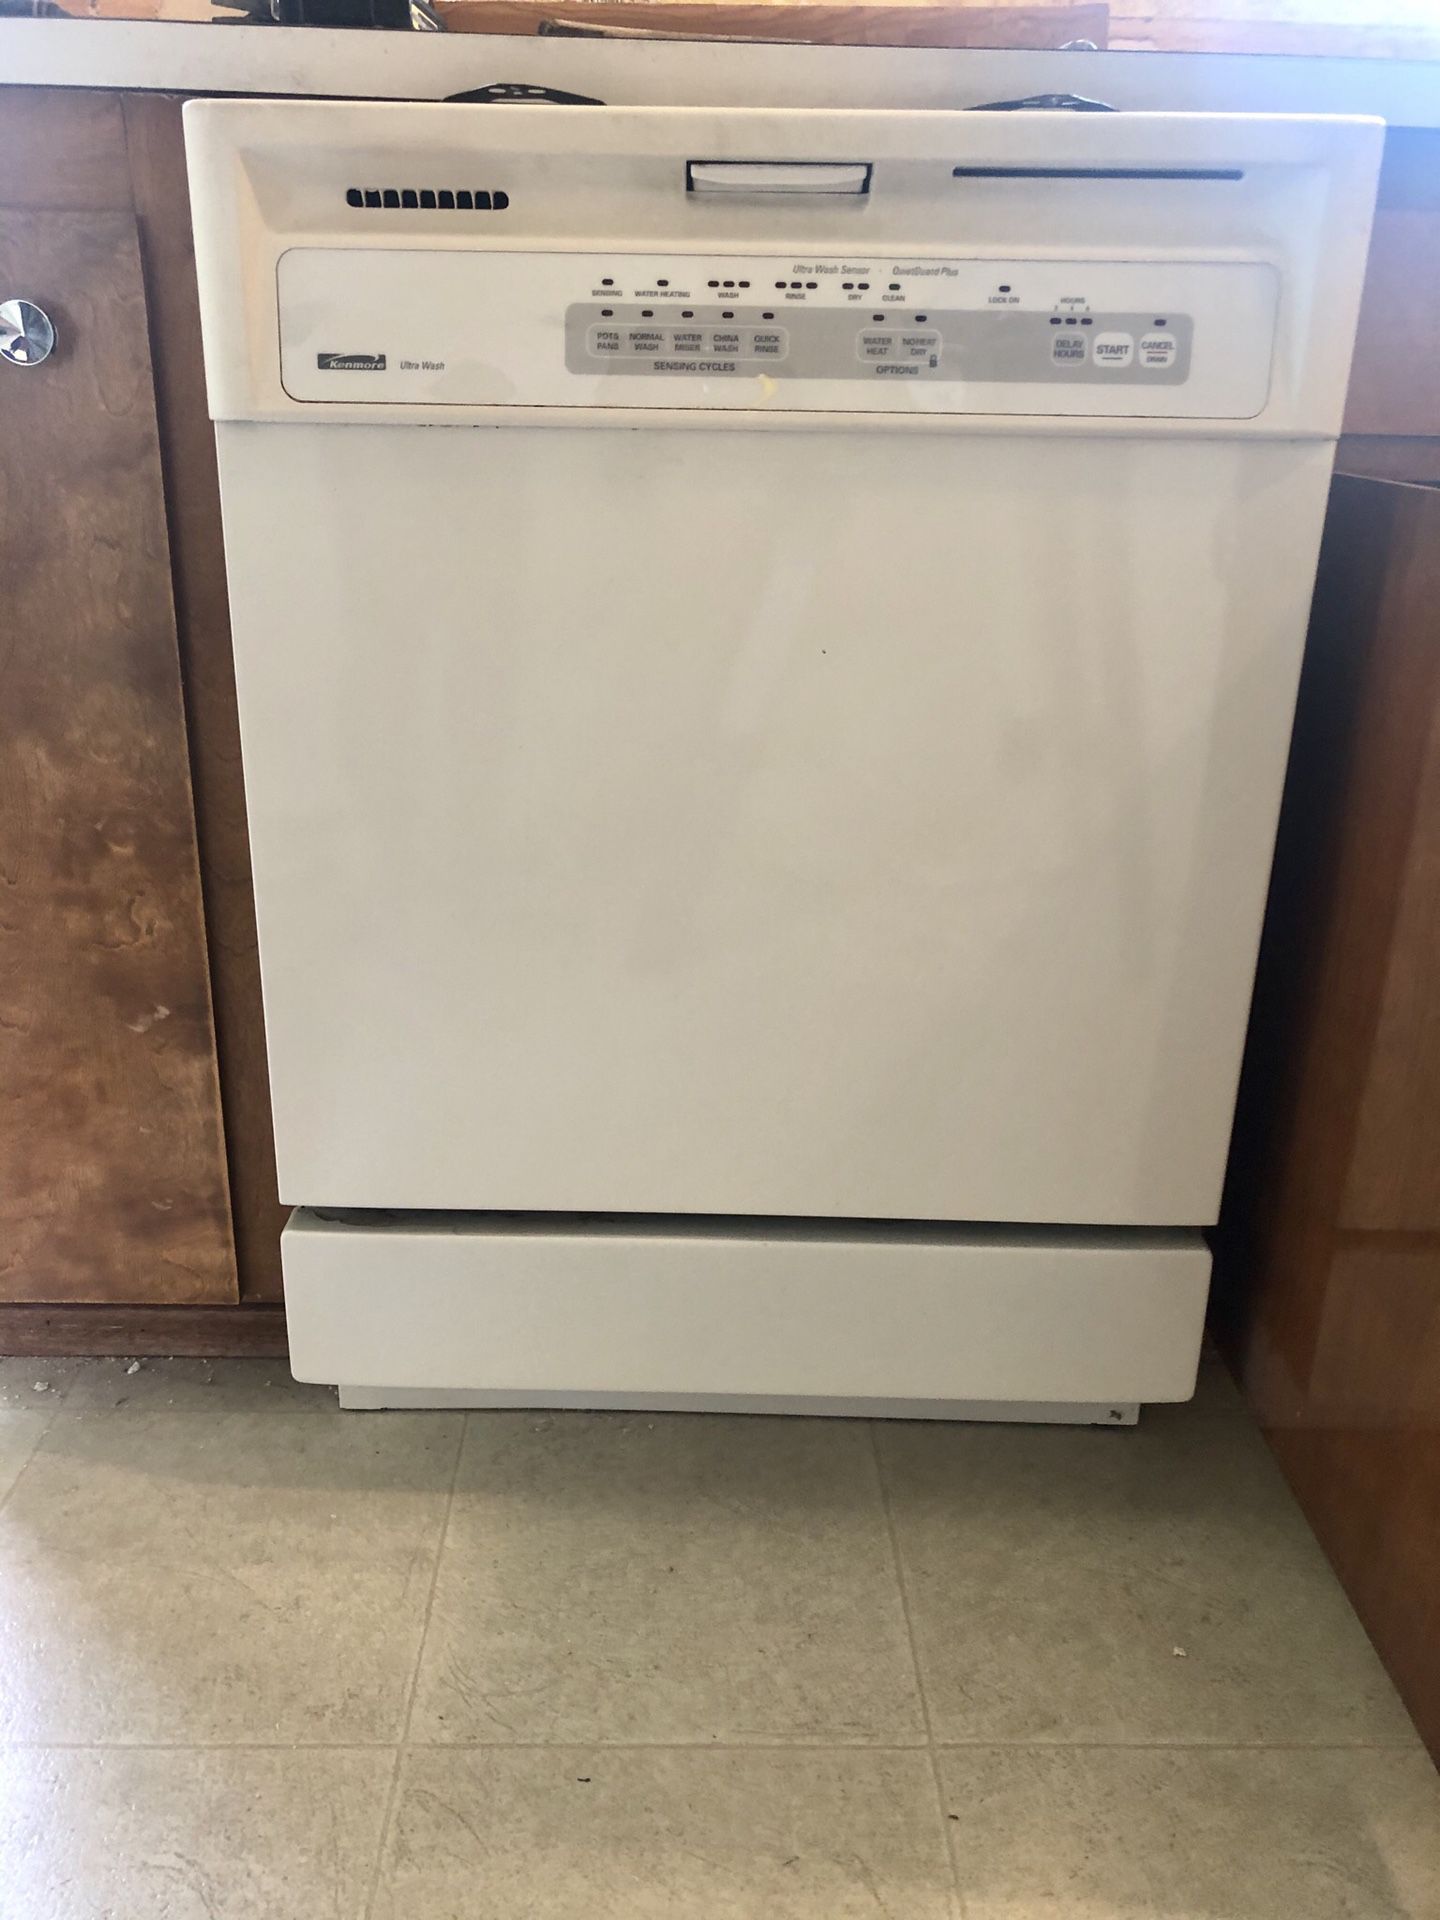 FREE Dishwasher and sink/faucet